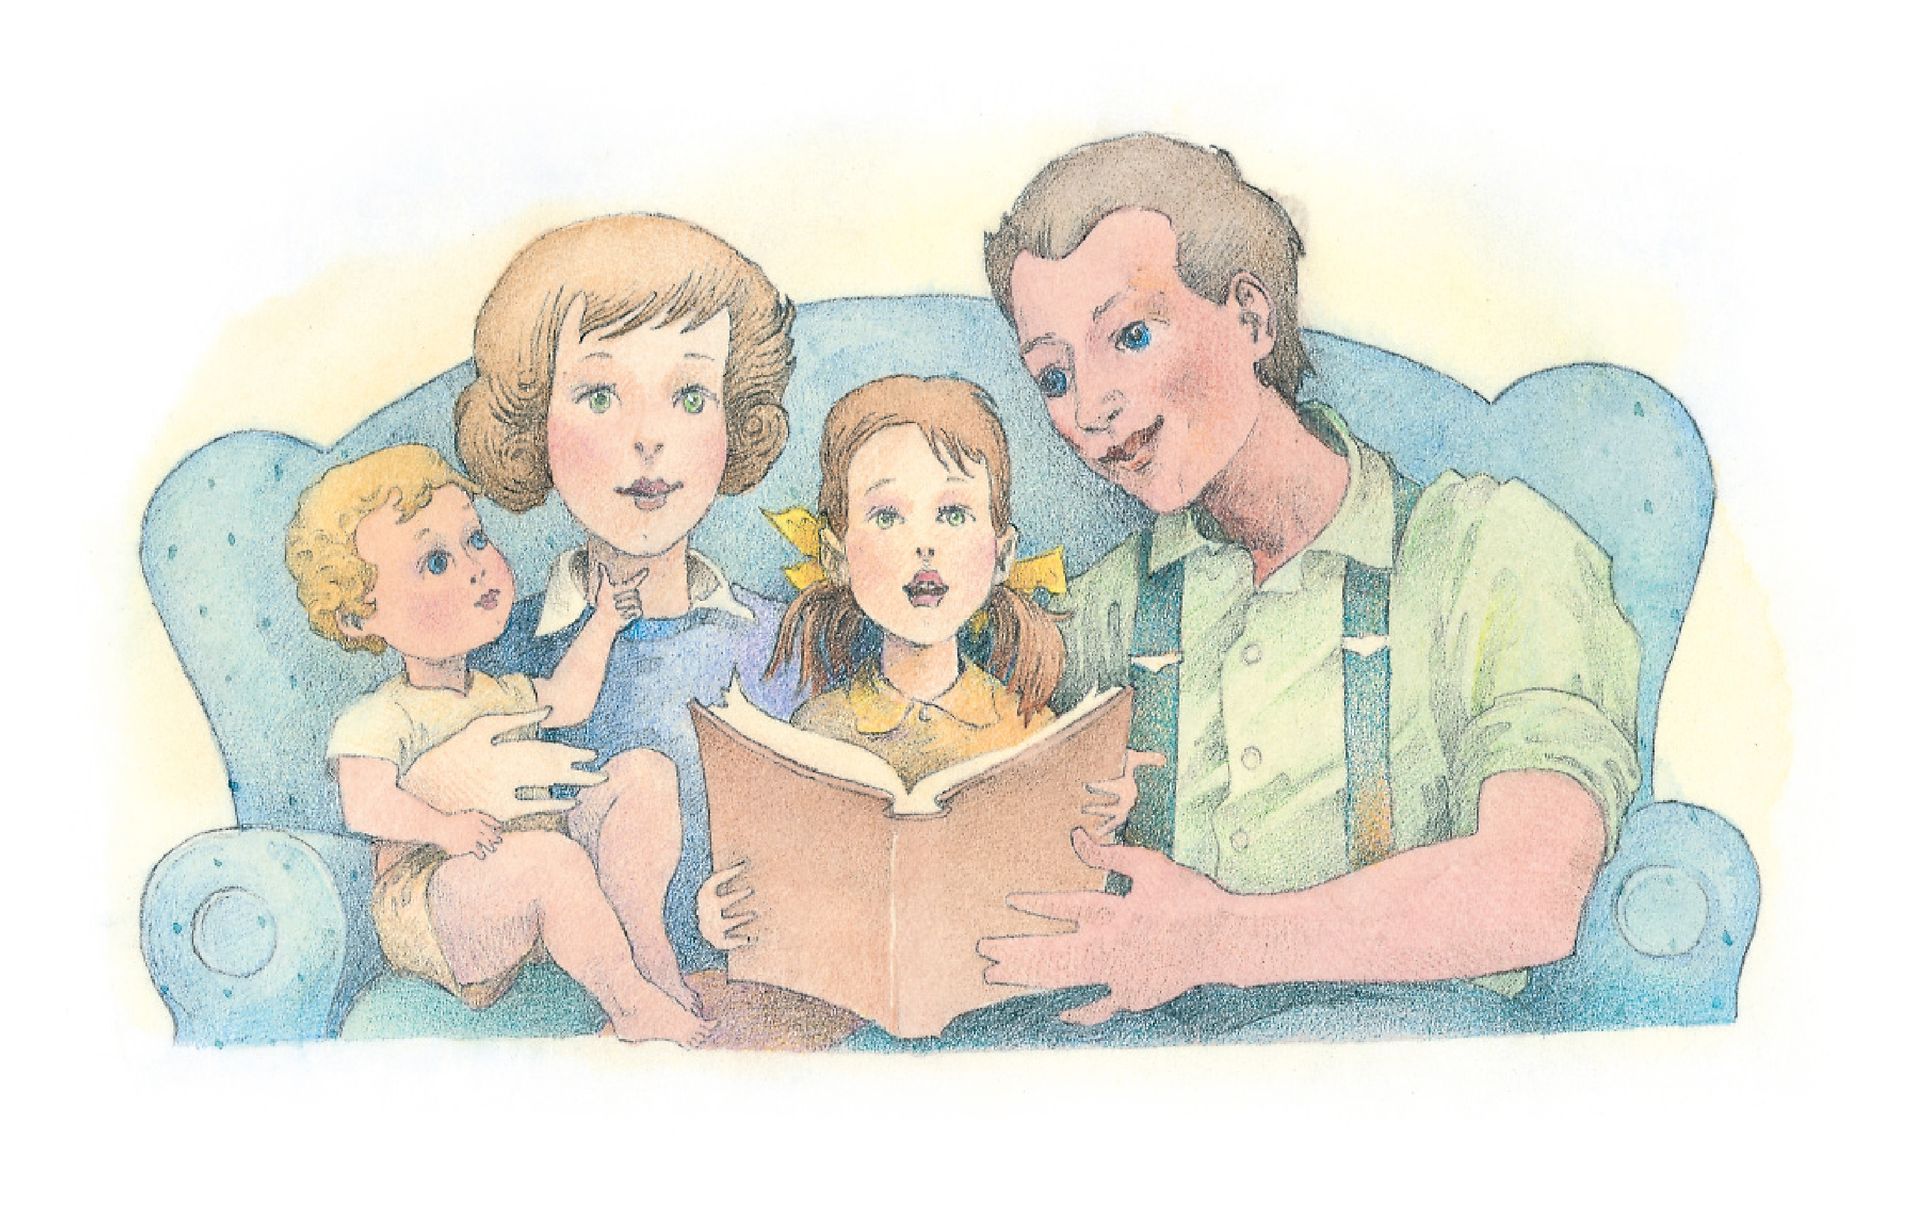 A family of four holding a songbook and singing together. From the Children’s Songbook, page 195, “Family Night”; watercolor illustration by Richard Hull.